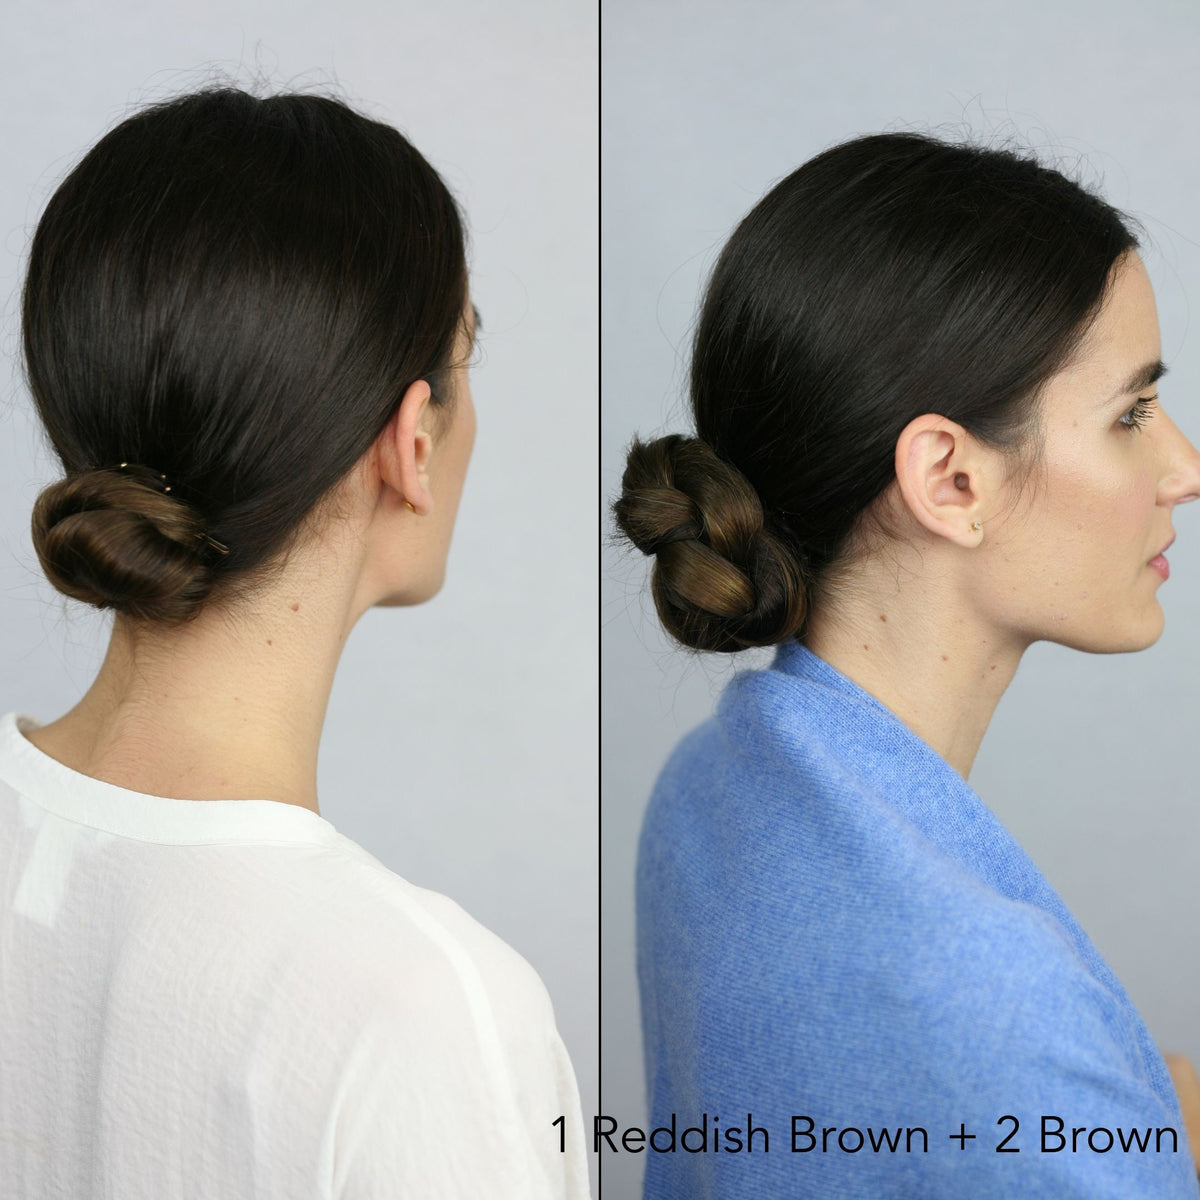 Trransformation before after photo on woman in blue pashmina and braided bun using Easy Updo Extensions for more volume in her hair